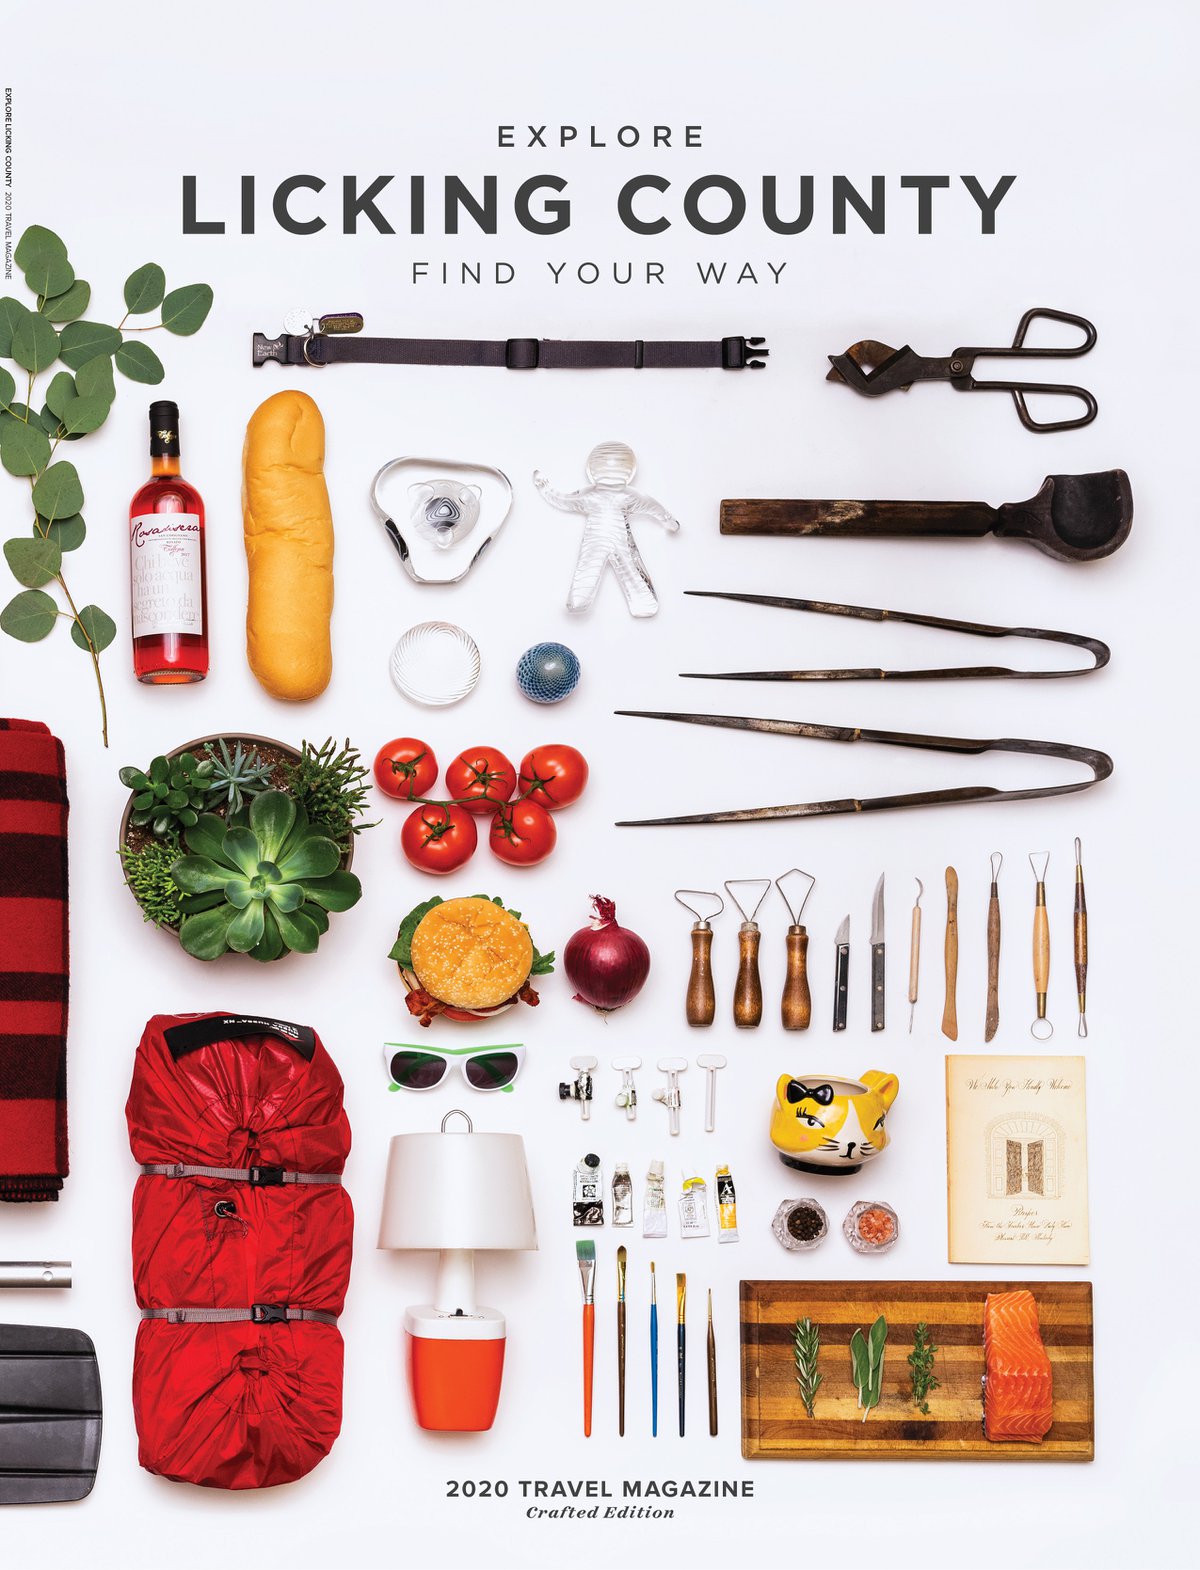 Explore Licking County 2020